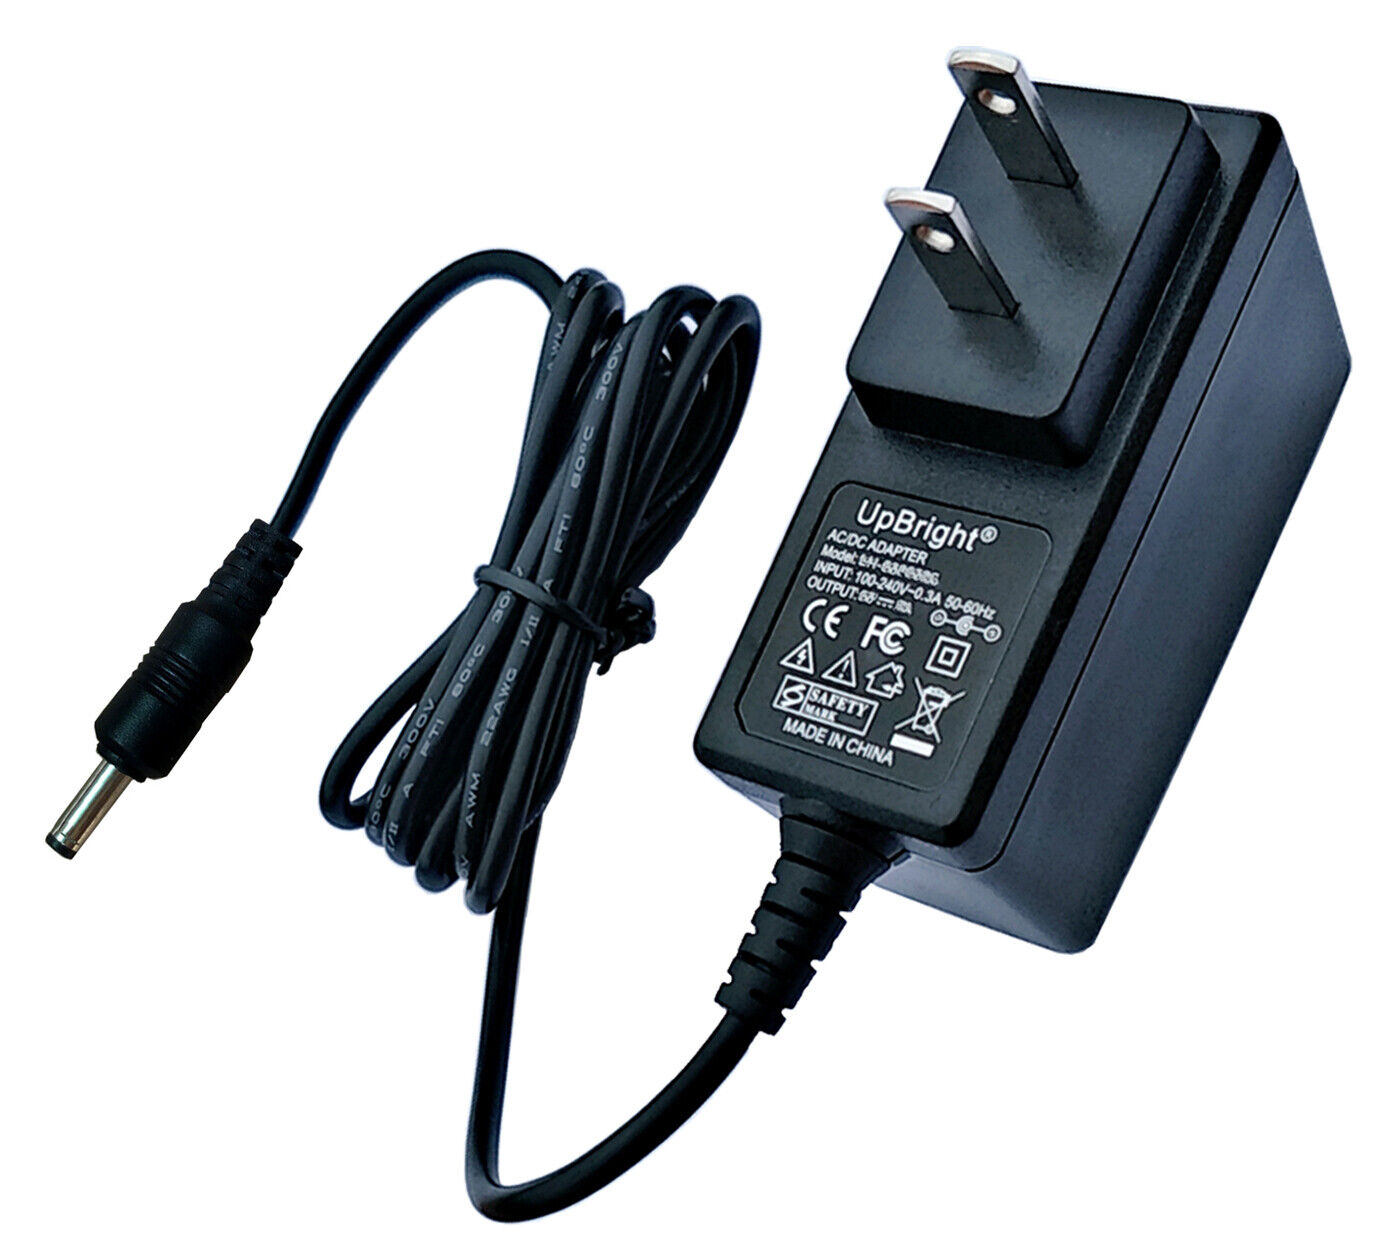 5V AC/DC Adapter For Arcade1Up MSP-C-20300 Ms. Pac-Man Head To Head CounterCade